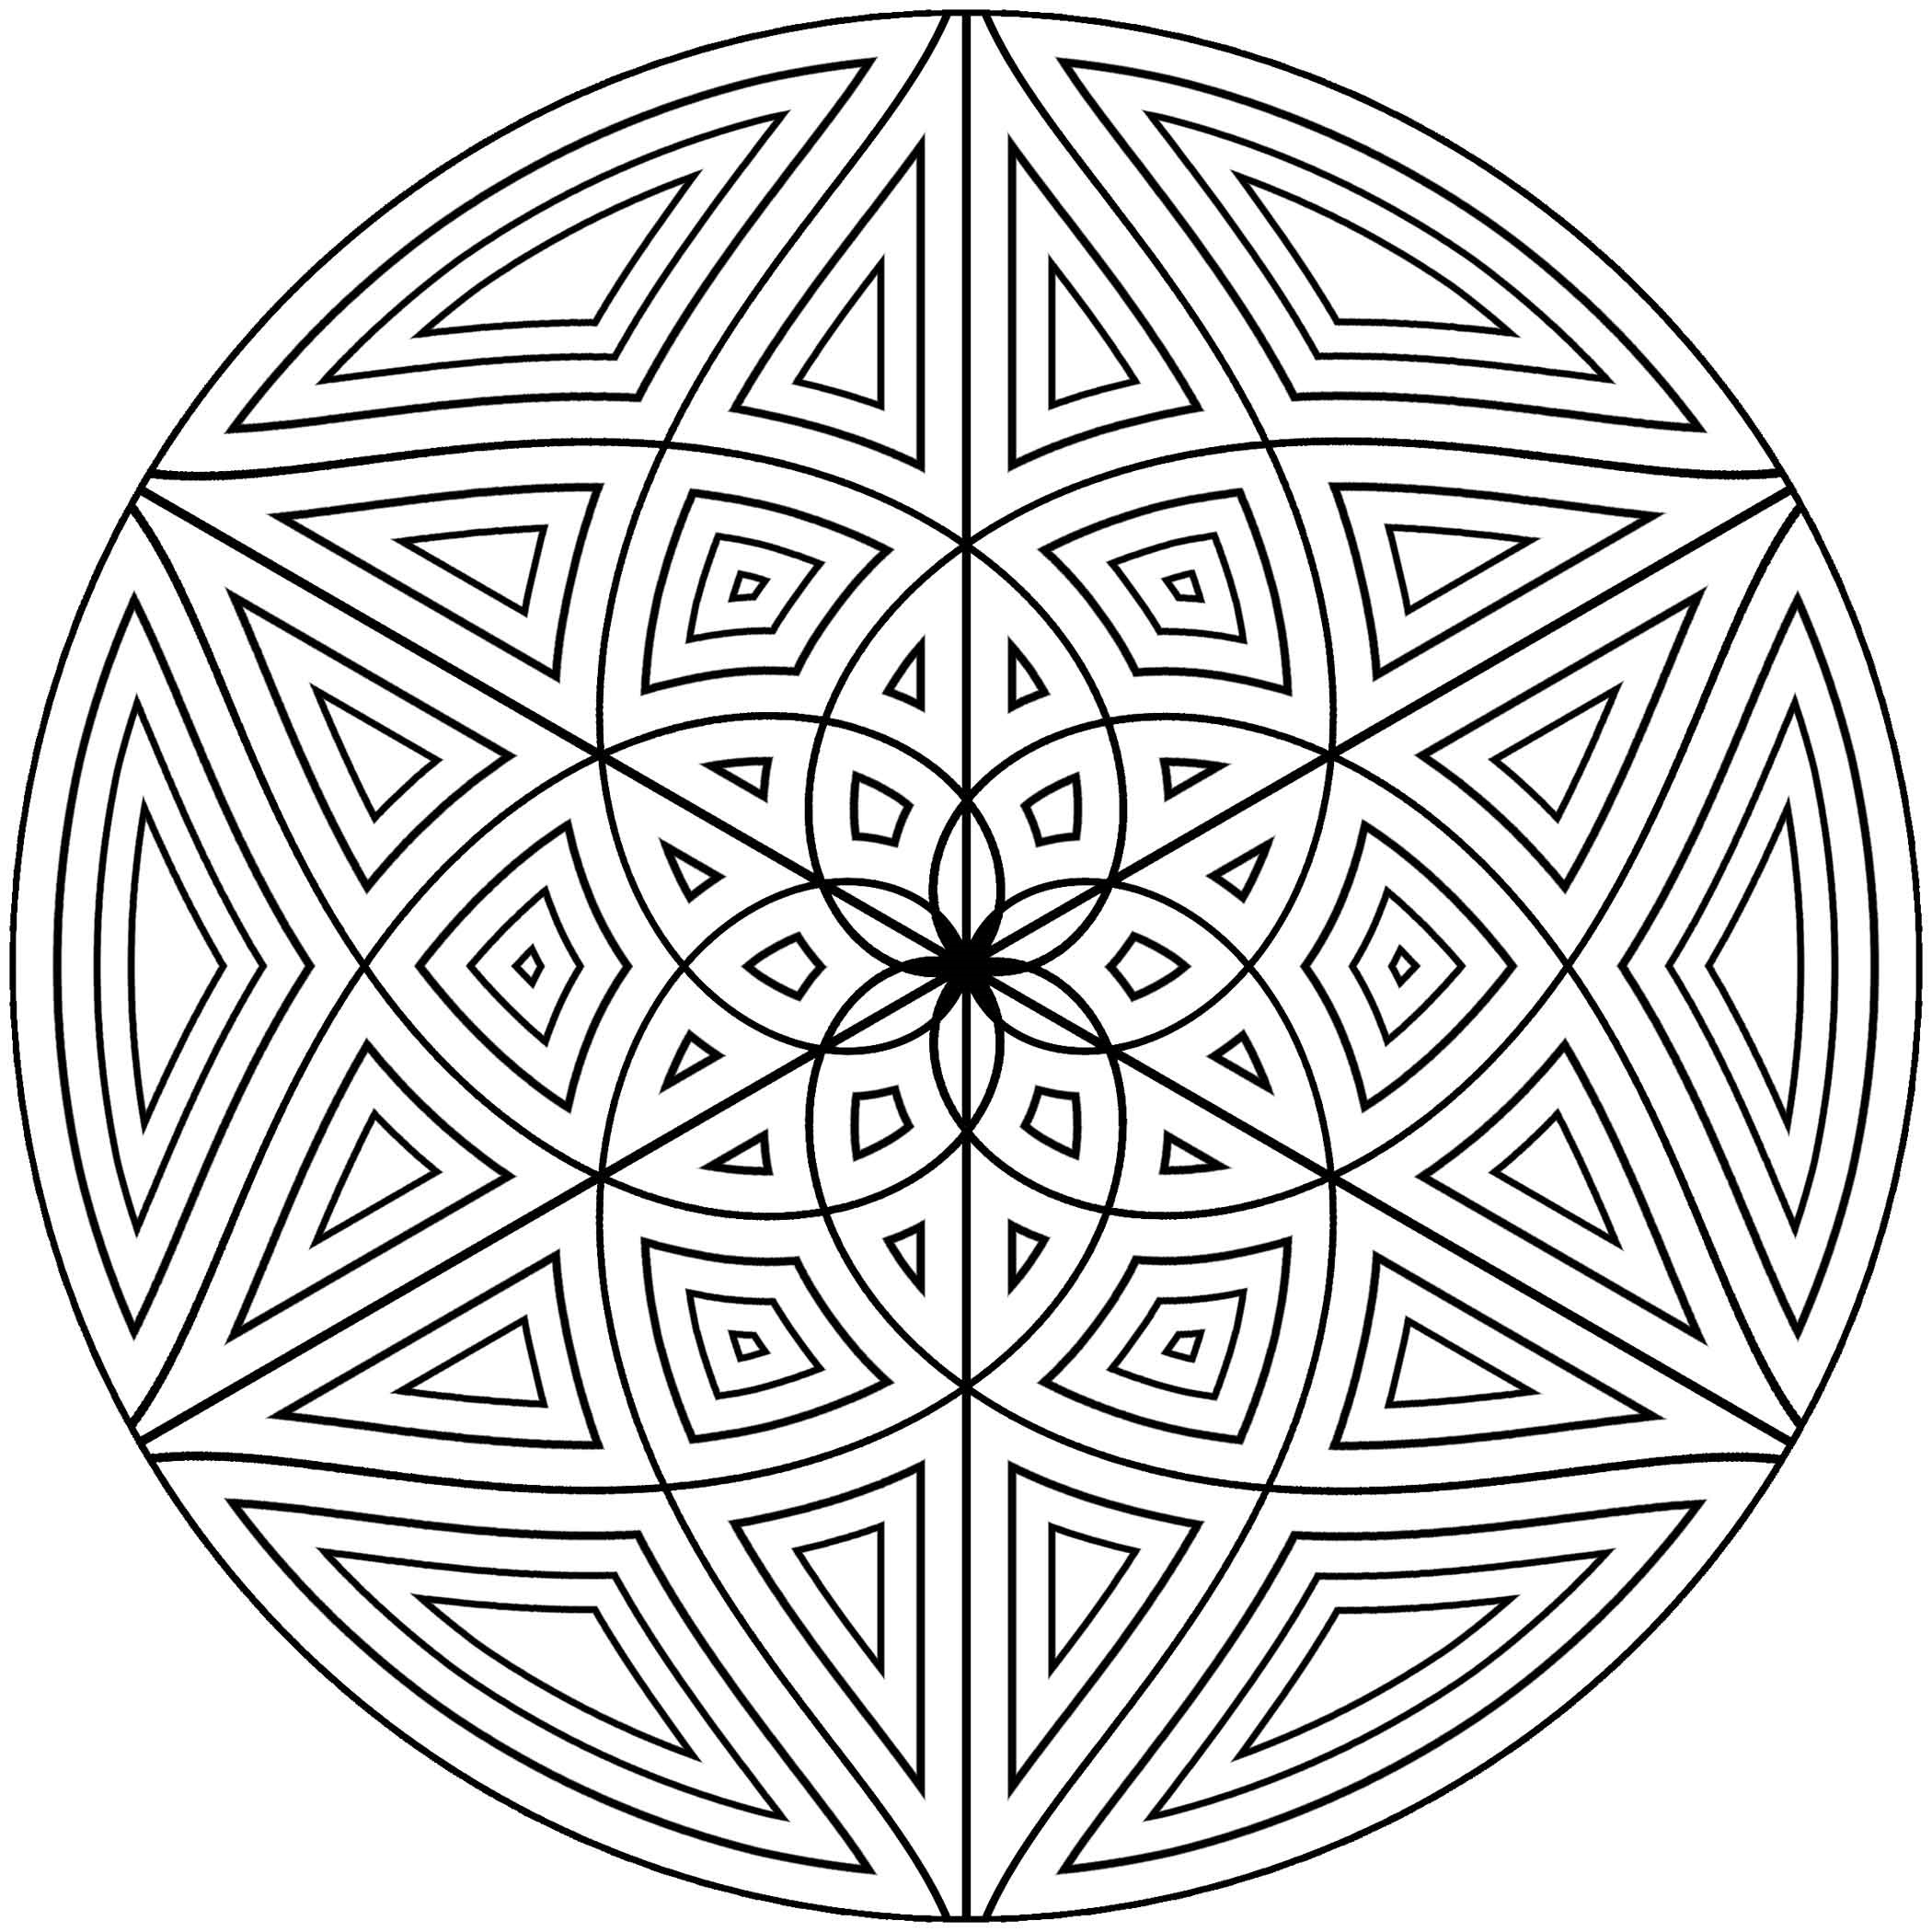 Download Free Printable Geometric Coloring Pages for Adults.